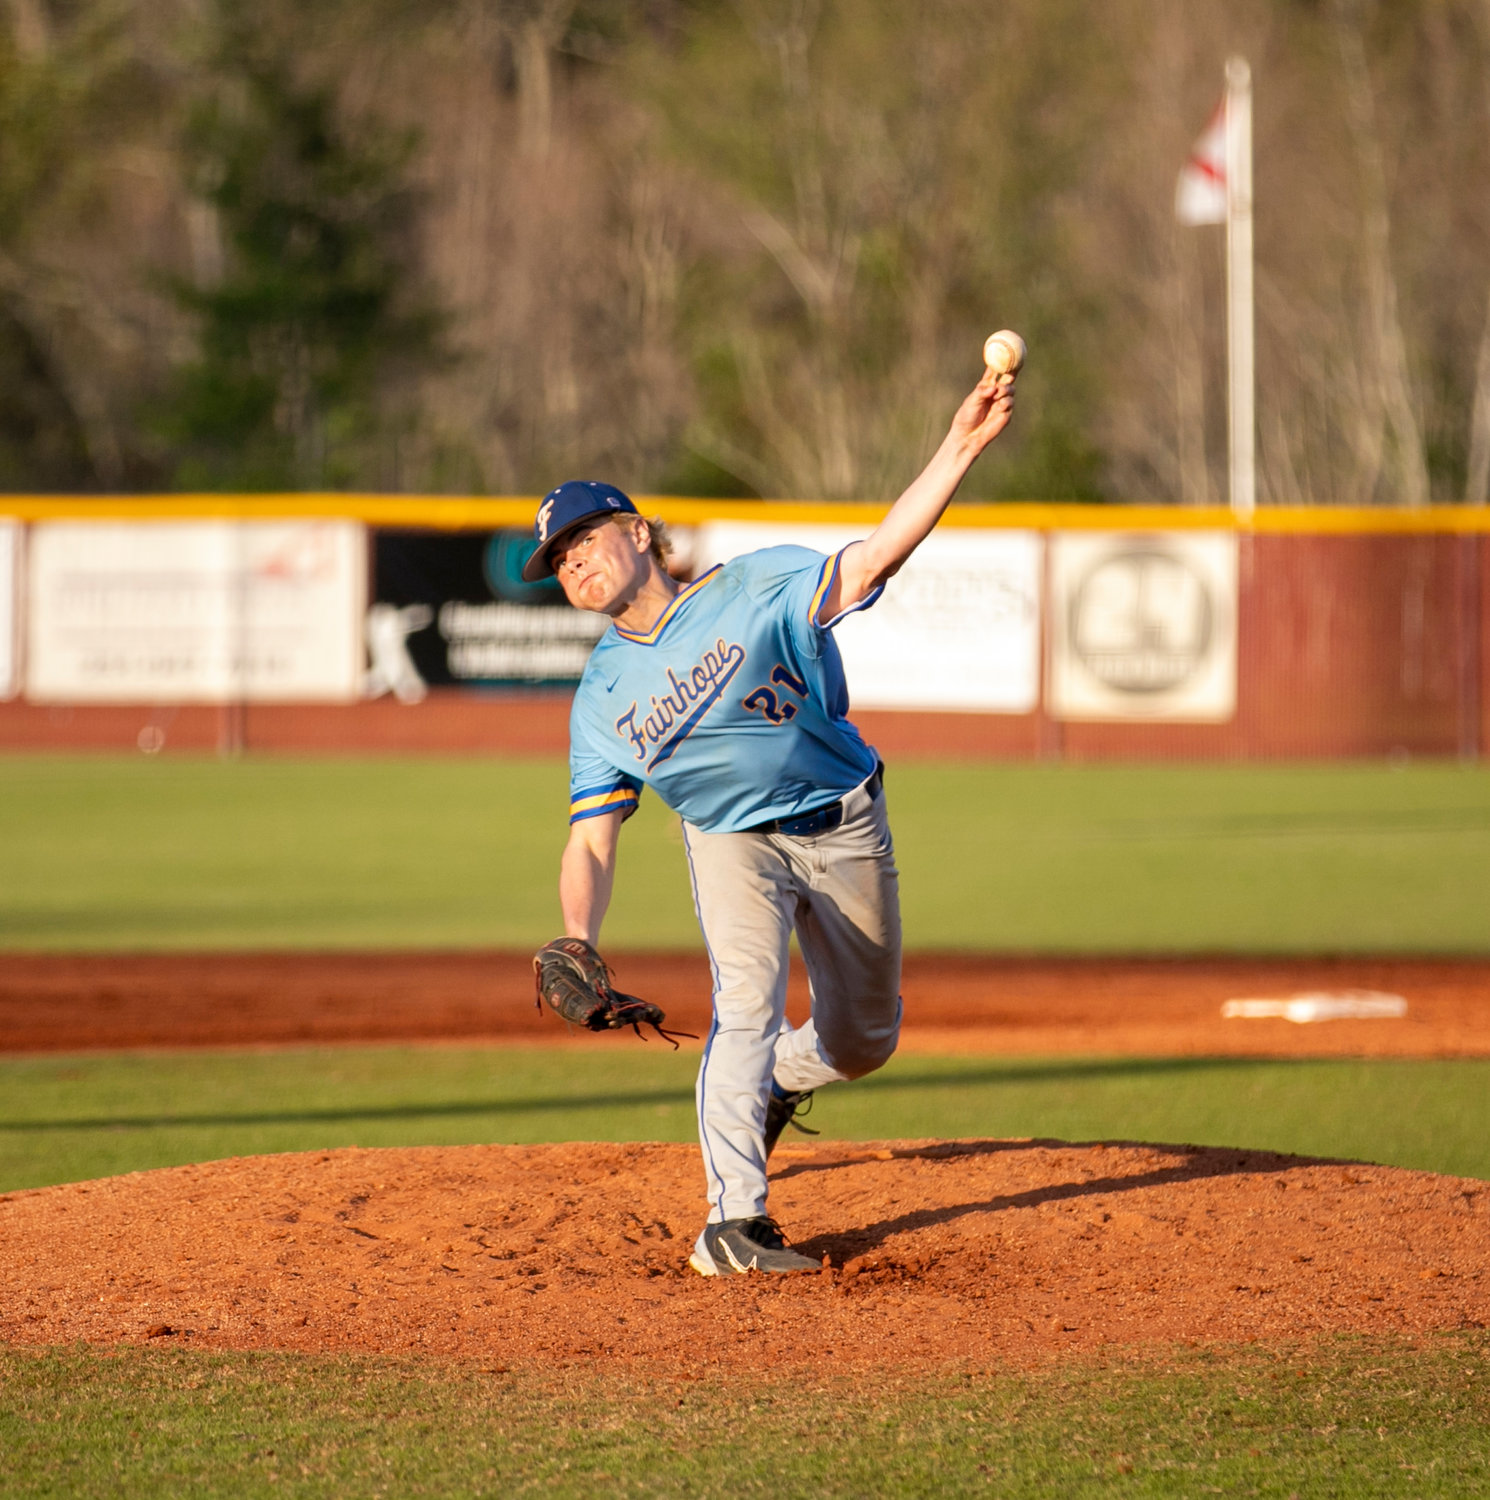 Fairhope’s Jerry McDowell throws a pitch at Robertsdale High School during the PBR South Alabama Showdown Saturday, Feb. 26. The Pirates battled the Golden Bears as part of a 14-team event that converged on the Alabama Gulf Coast this weekend.